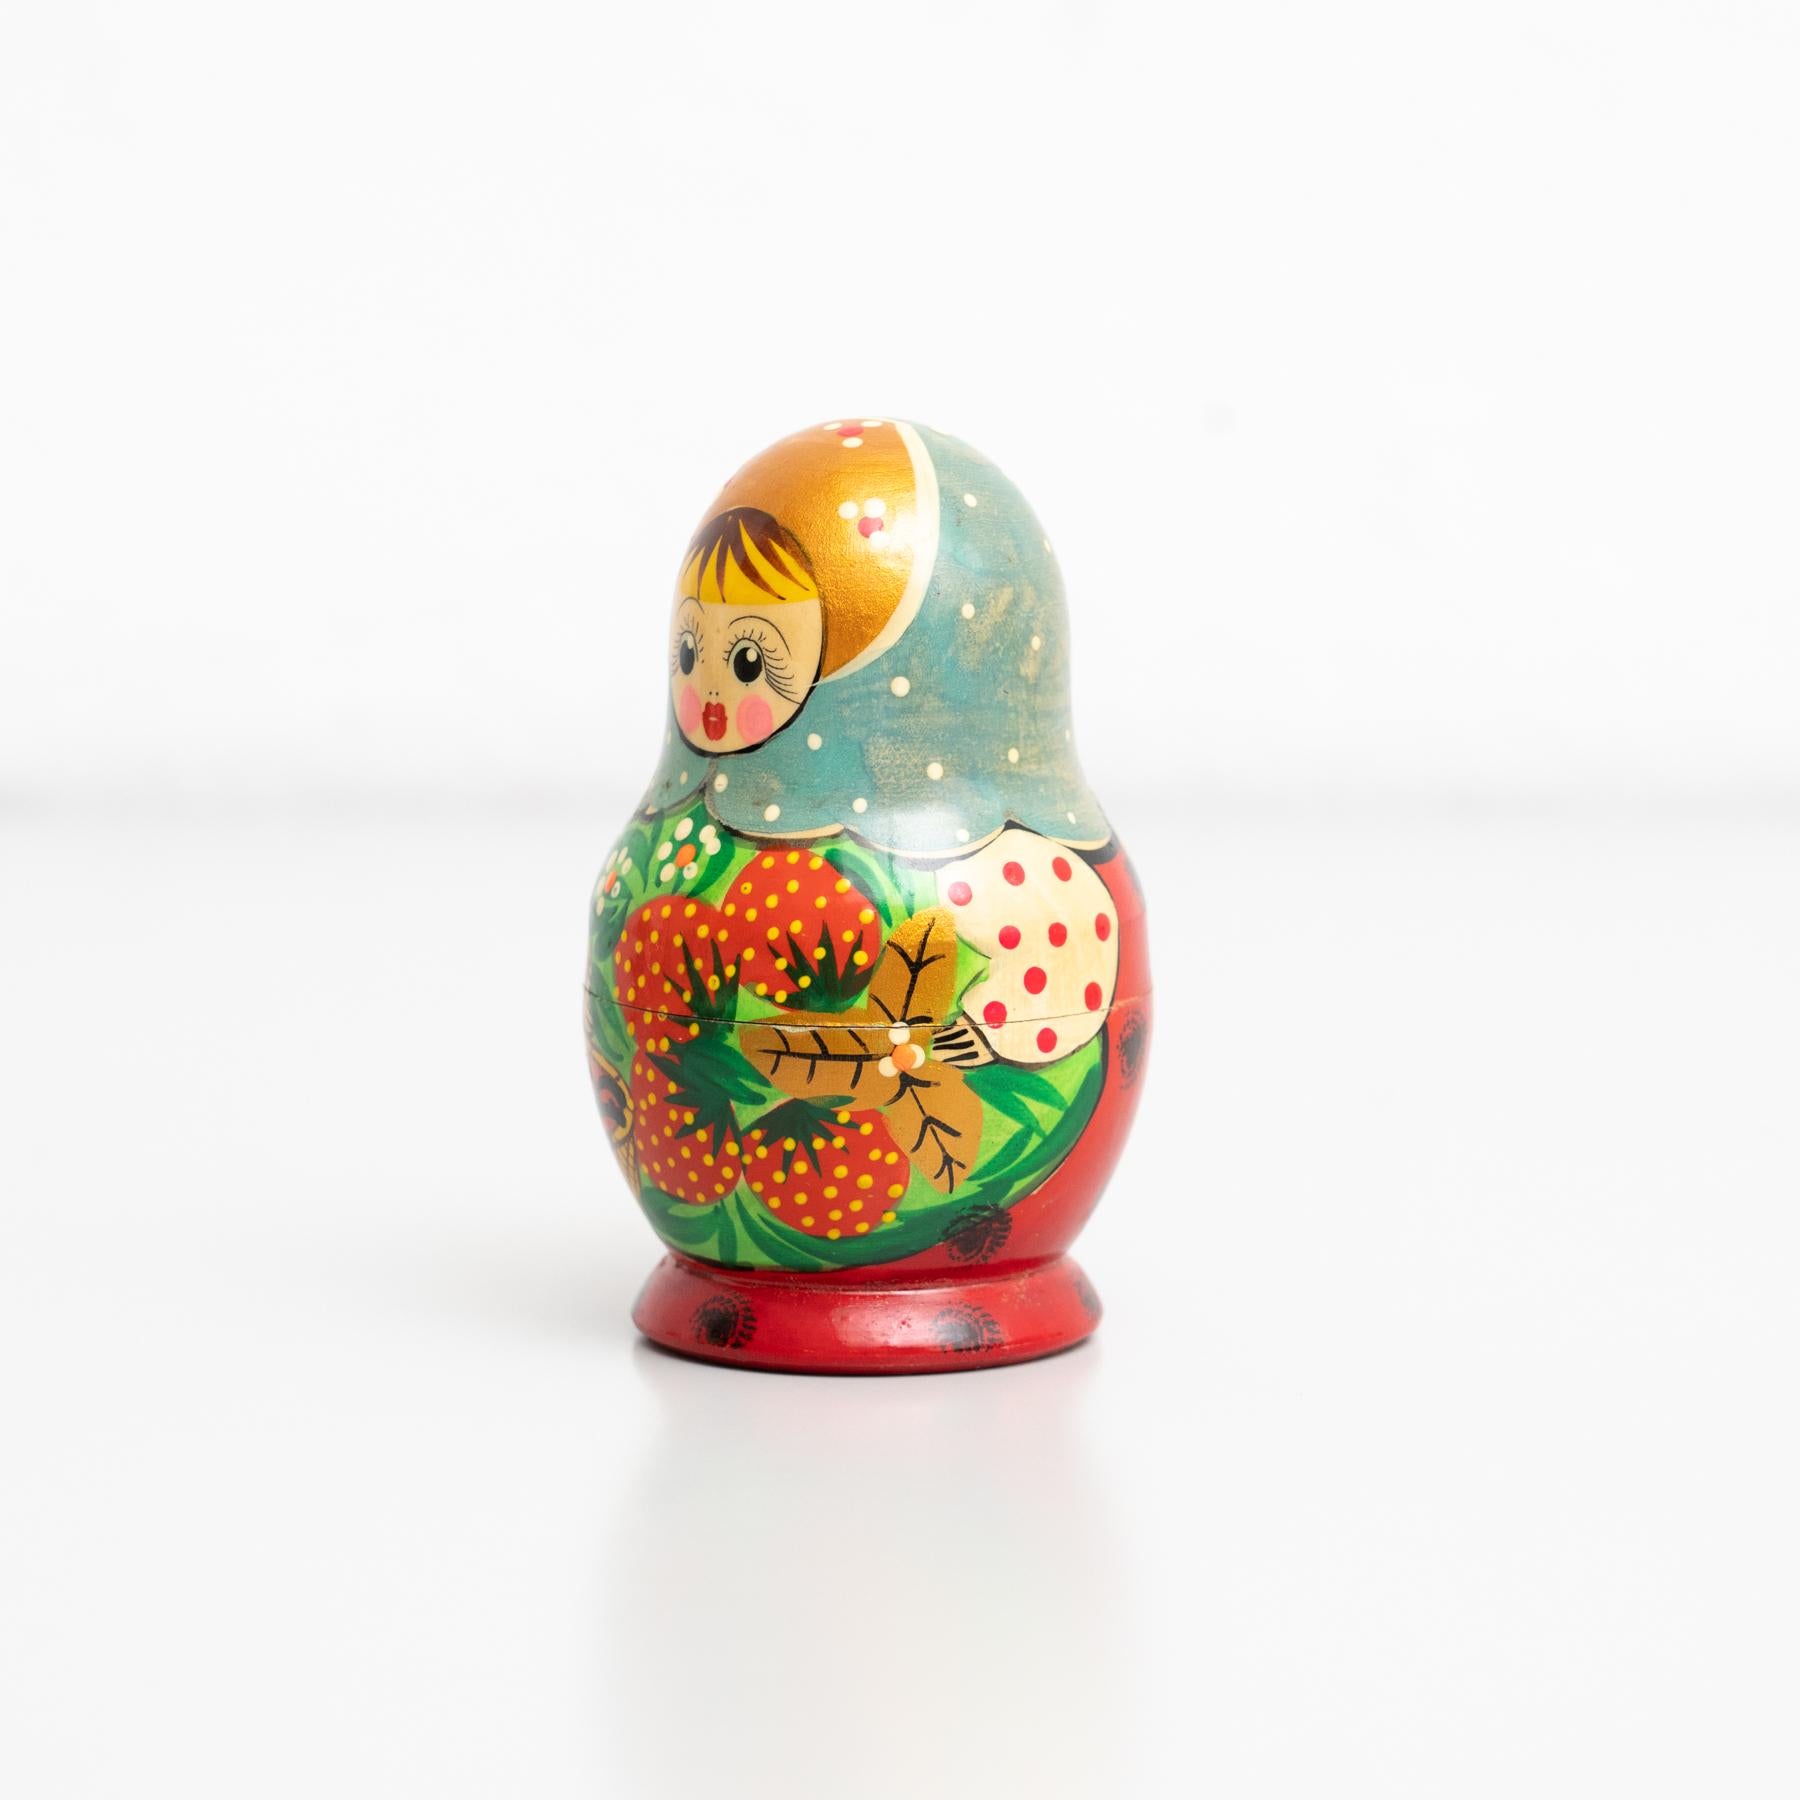 Antique Traditional Hand-Painted Wooden Russian Doll, circa 1960 For Sale 3